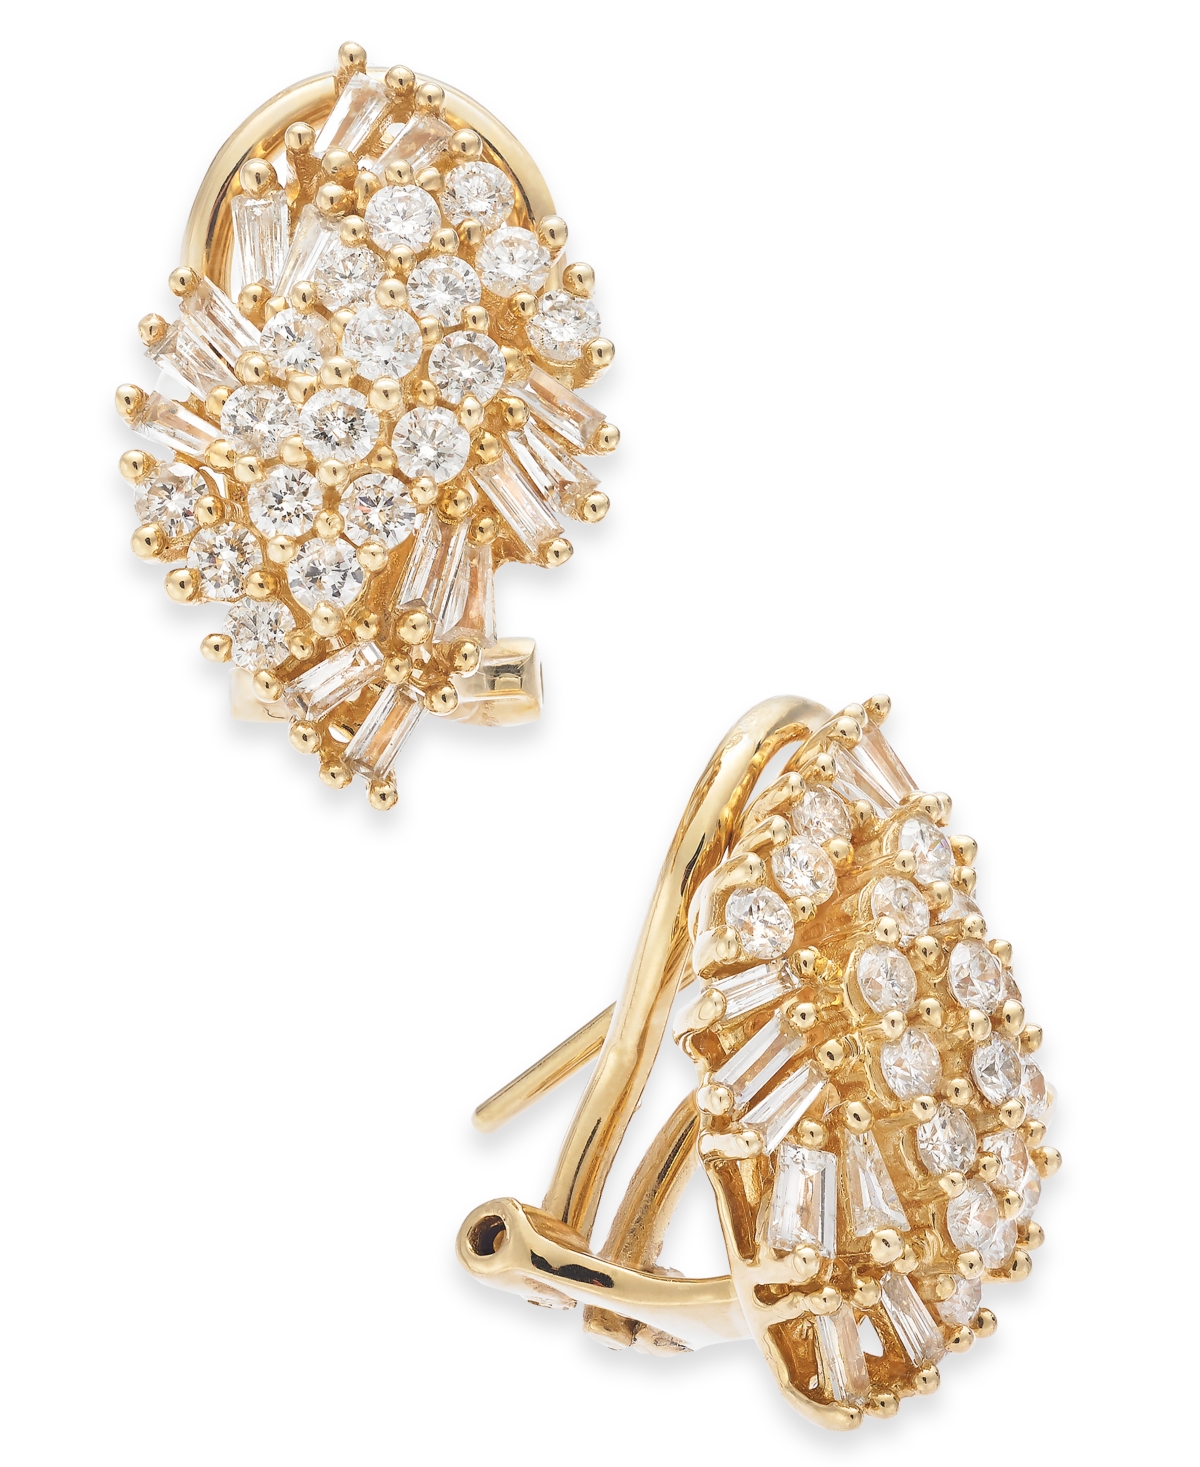 Diamond Cluster Earrings (1 ct. t.w.) in 14k Gold, Created for Macy's - Yellow Gold